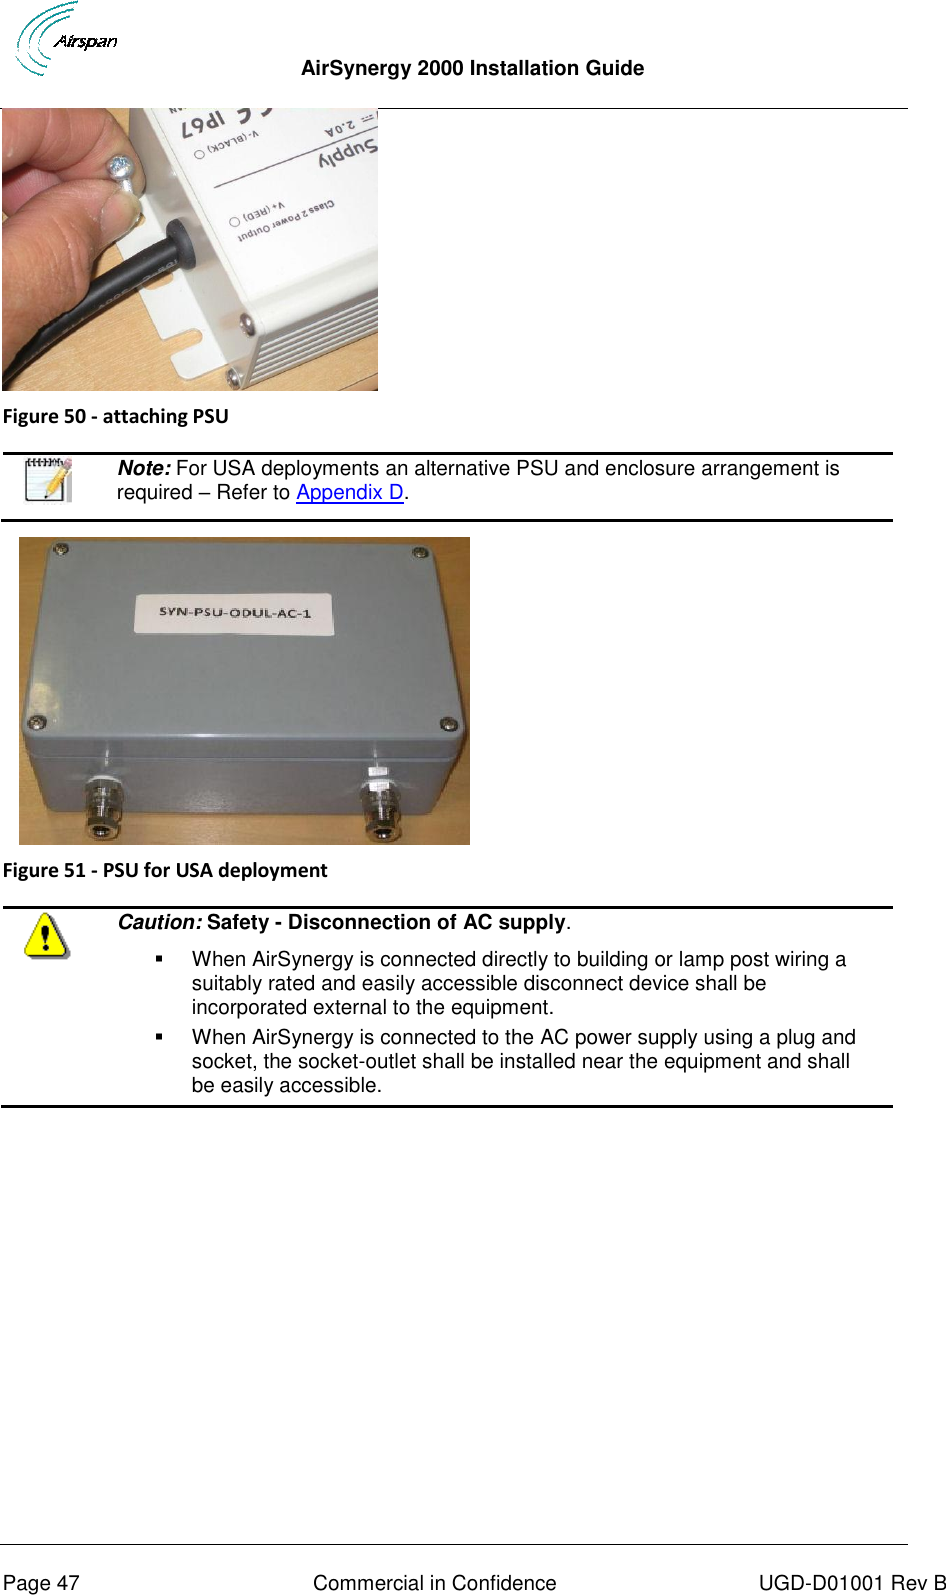  AirSynergy 2000 Installation Guide     Page 47  Commercial in Confidence  UGD-D01001 Rev B  Figure 50 - attaching PSU    Note: For USA deployments an alternative PSU and enclosure arrangement is required – Refer to Appendix D.        Figure 51 - PSU for USA deployment   Caution: Safety - Disconnection of AC supply.   When AirSynergy is connected directly to building or lamp post wiring a suitably rated and easily accessible disconnect device shall be incorporated external to the equipment.    When AirSynergy is connected to the AC power supply using a plug and socket, the socket-outlet shall be installed near the equipment and shall be easily accessible.   